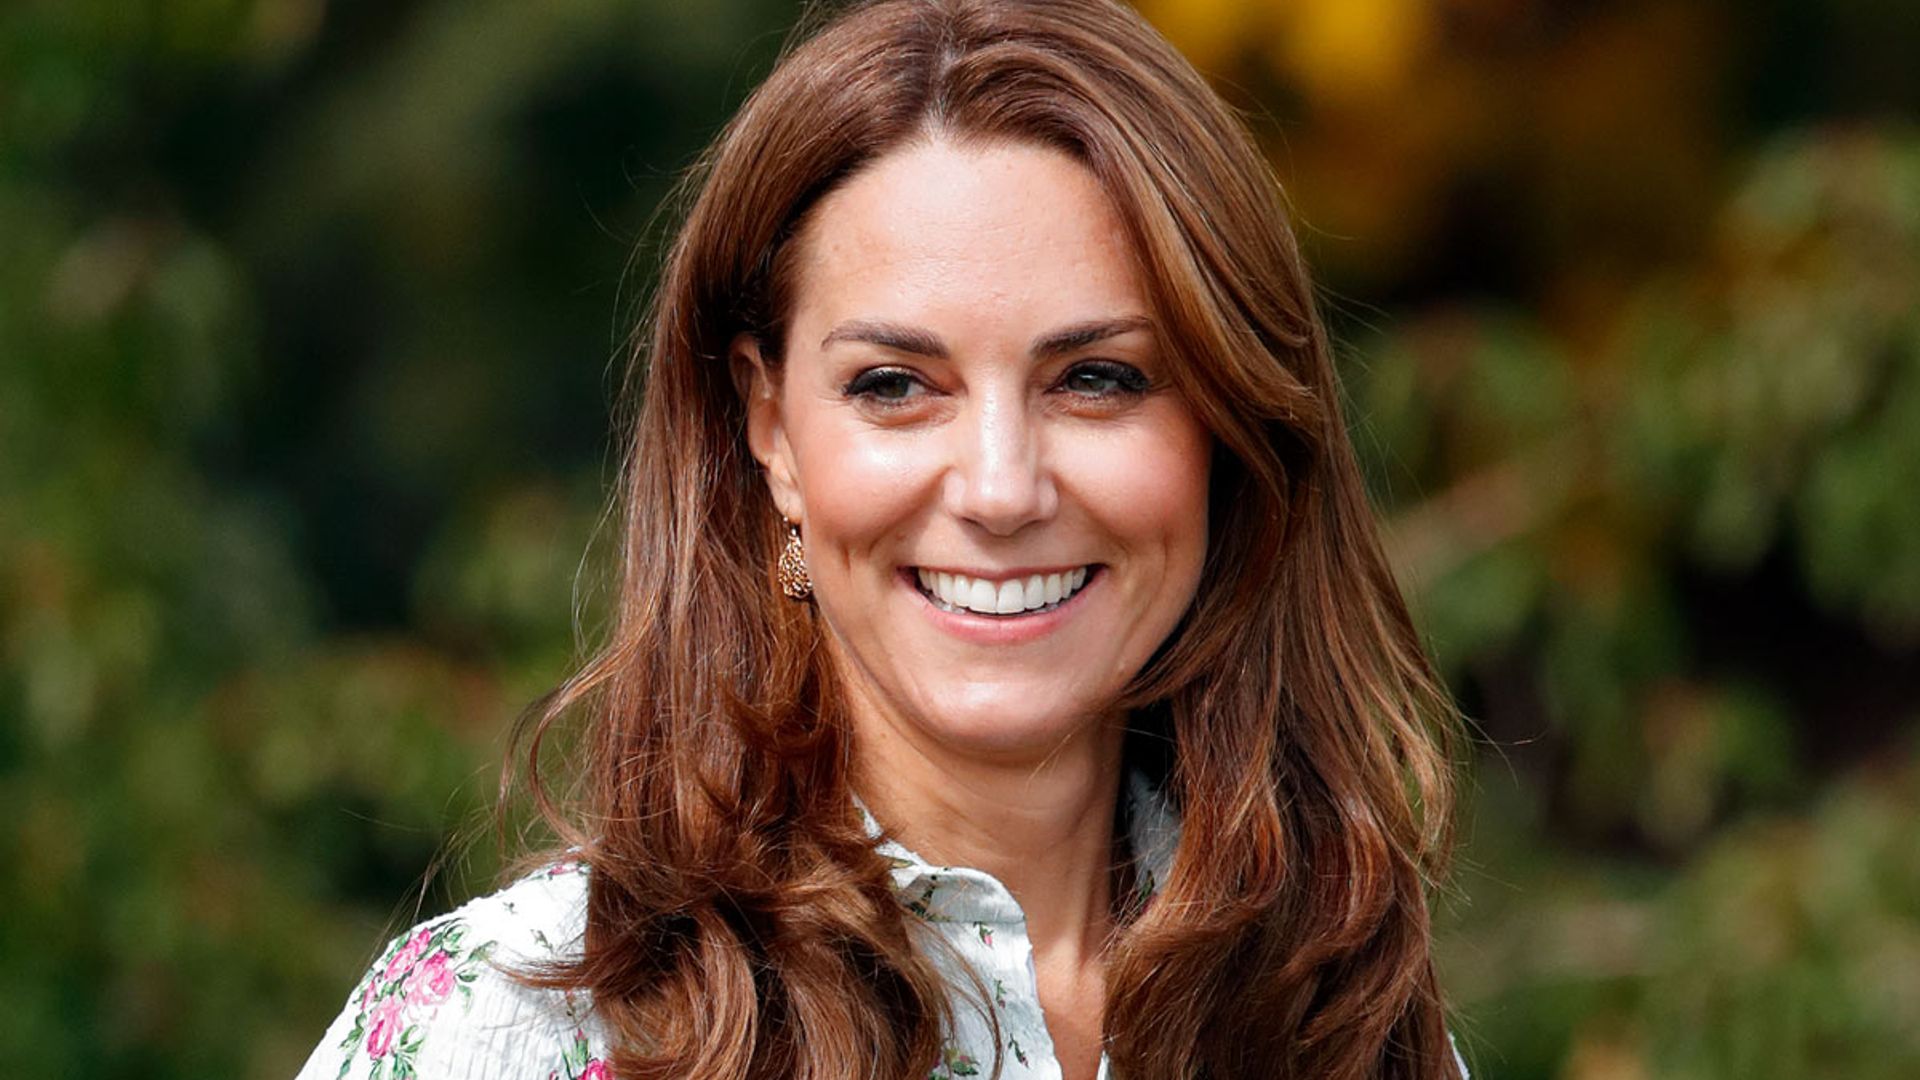 Kate Middleton's sell-out floral Ghost dress is helping raise money for NHS staff